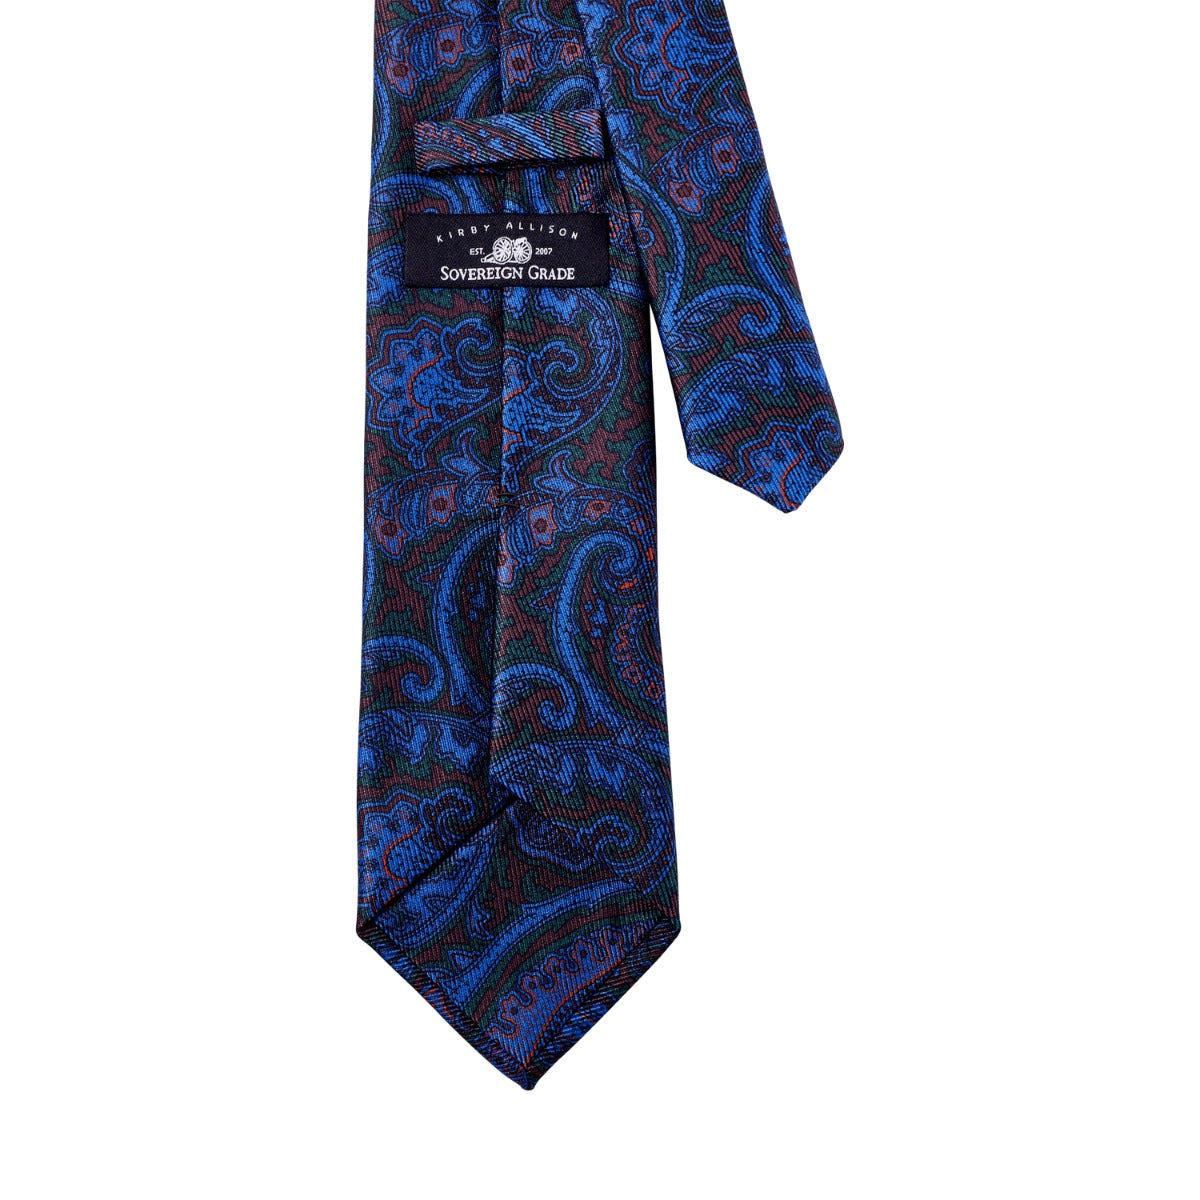 Sovereign Grade Navy and Brown Paisley Ancient Madder Silk Tie